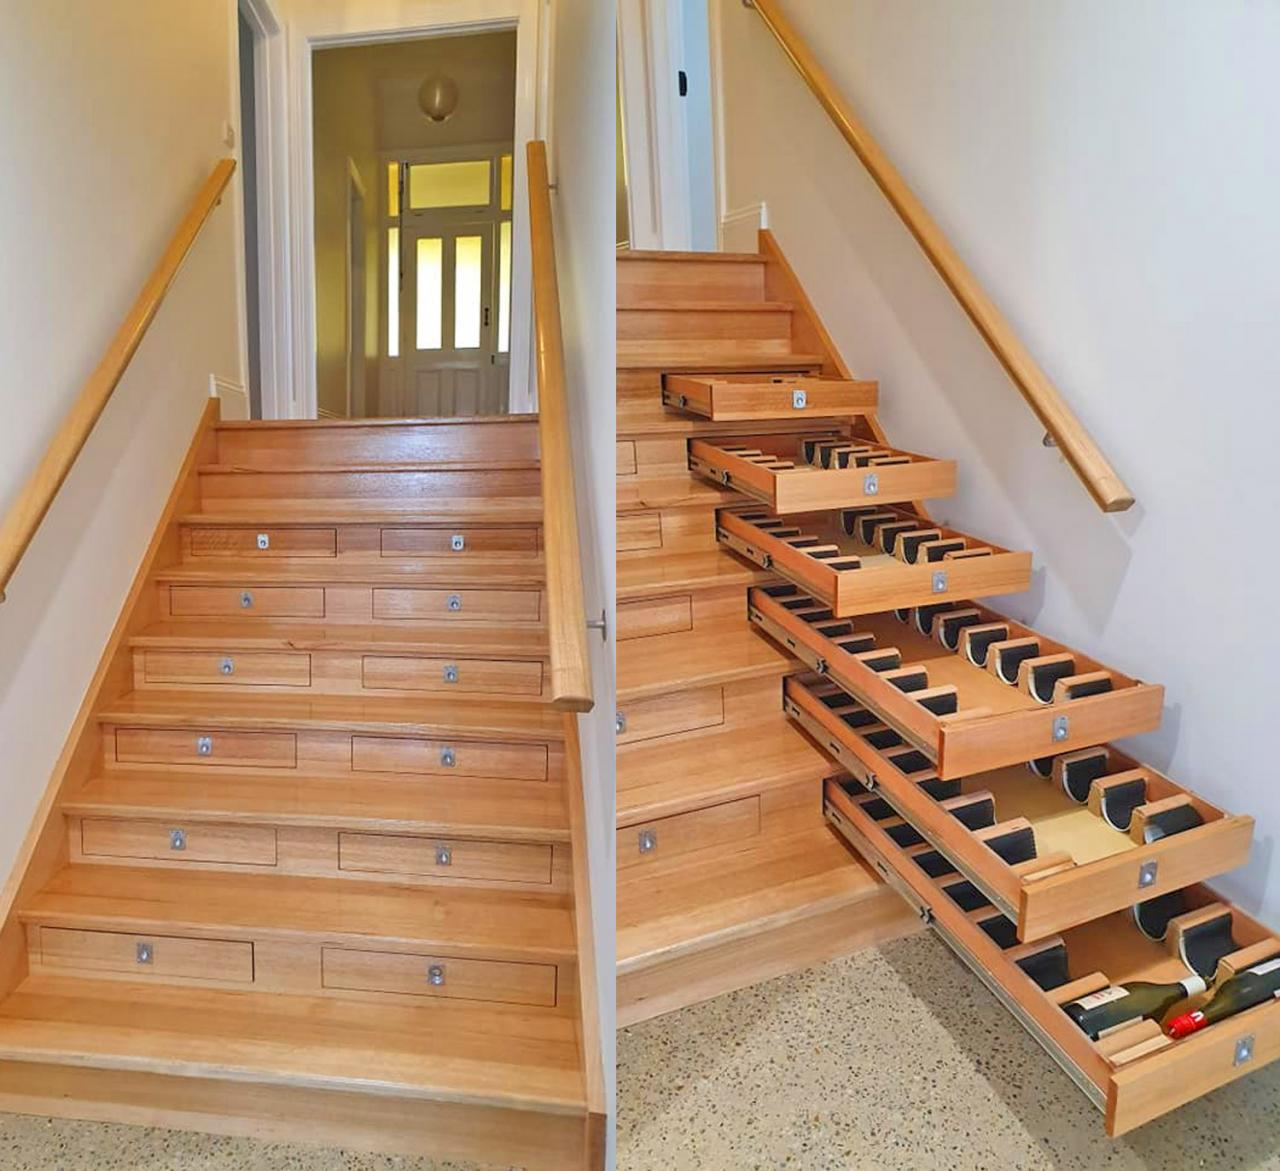 These Incredibly Clever Hidden Storage Ideas Will Make Great Use Of